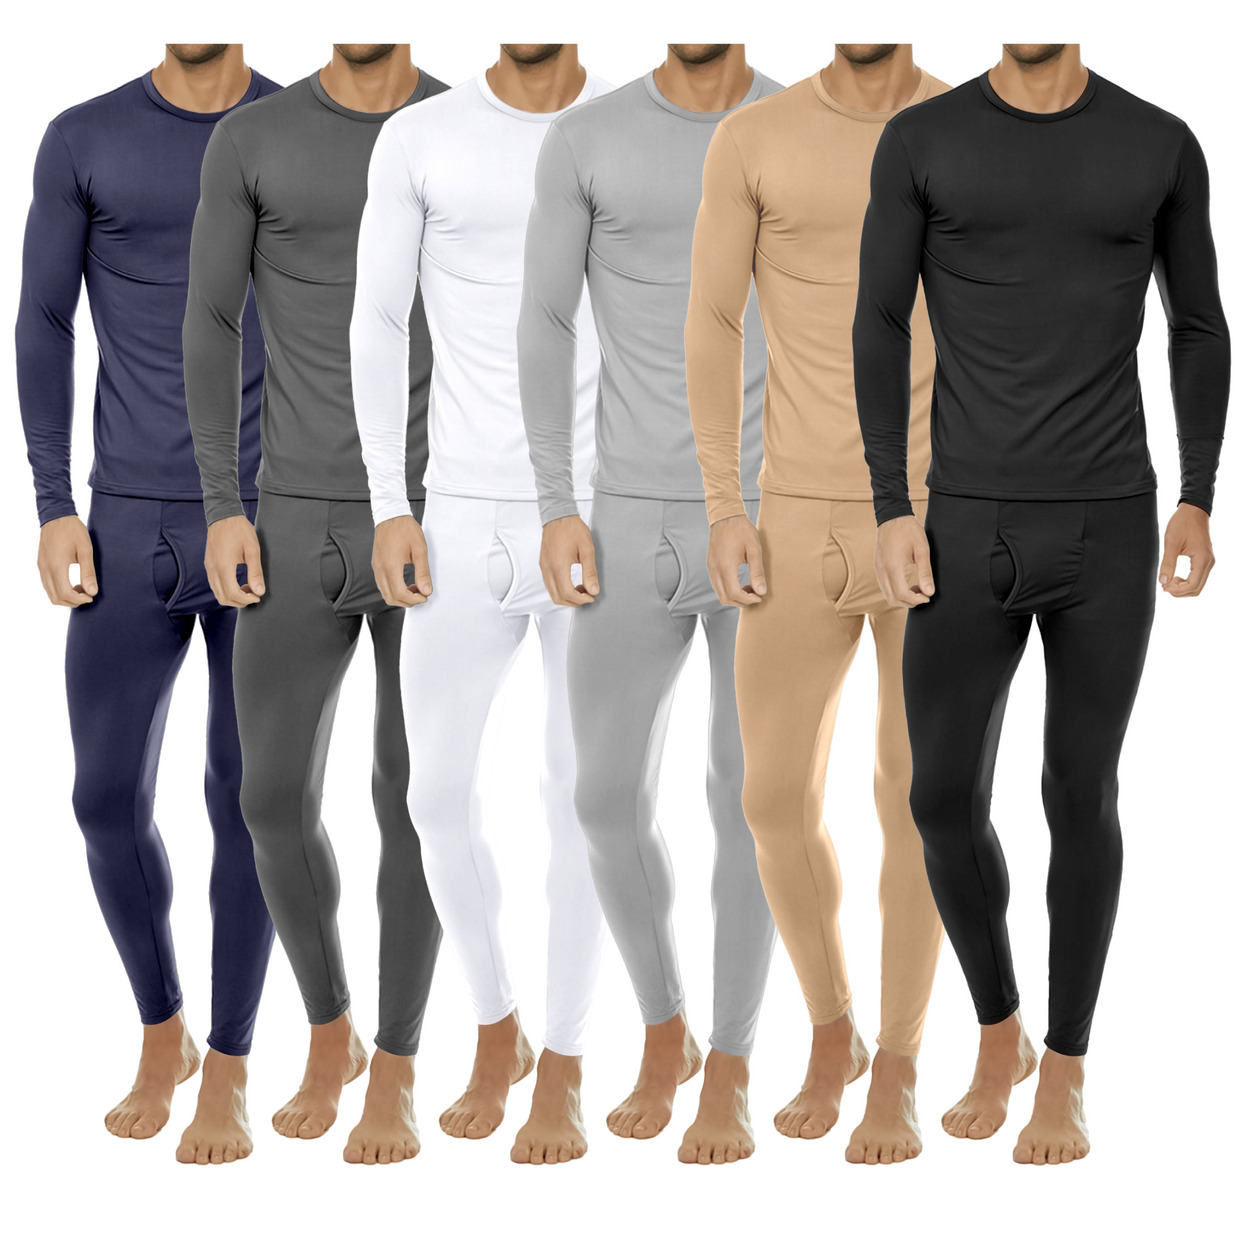 2-Pieces: Men's Winter Warm Fleece Lined Thermal Underwear Set For Cold Weather - Grey, Xx-large